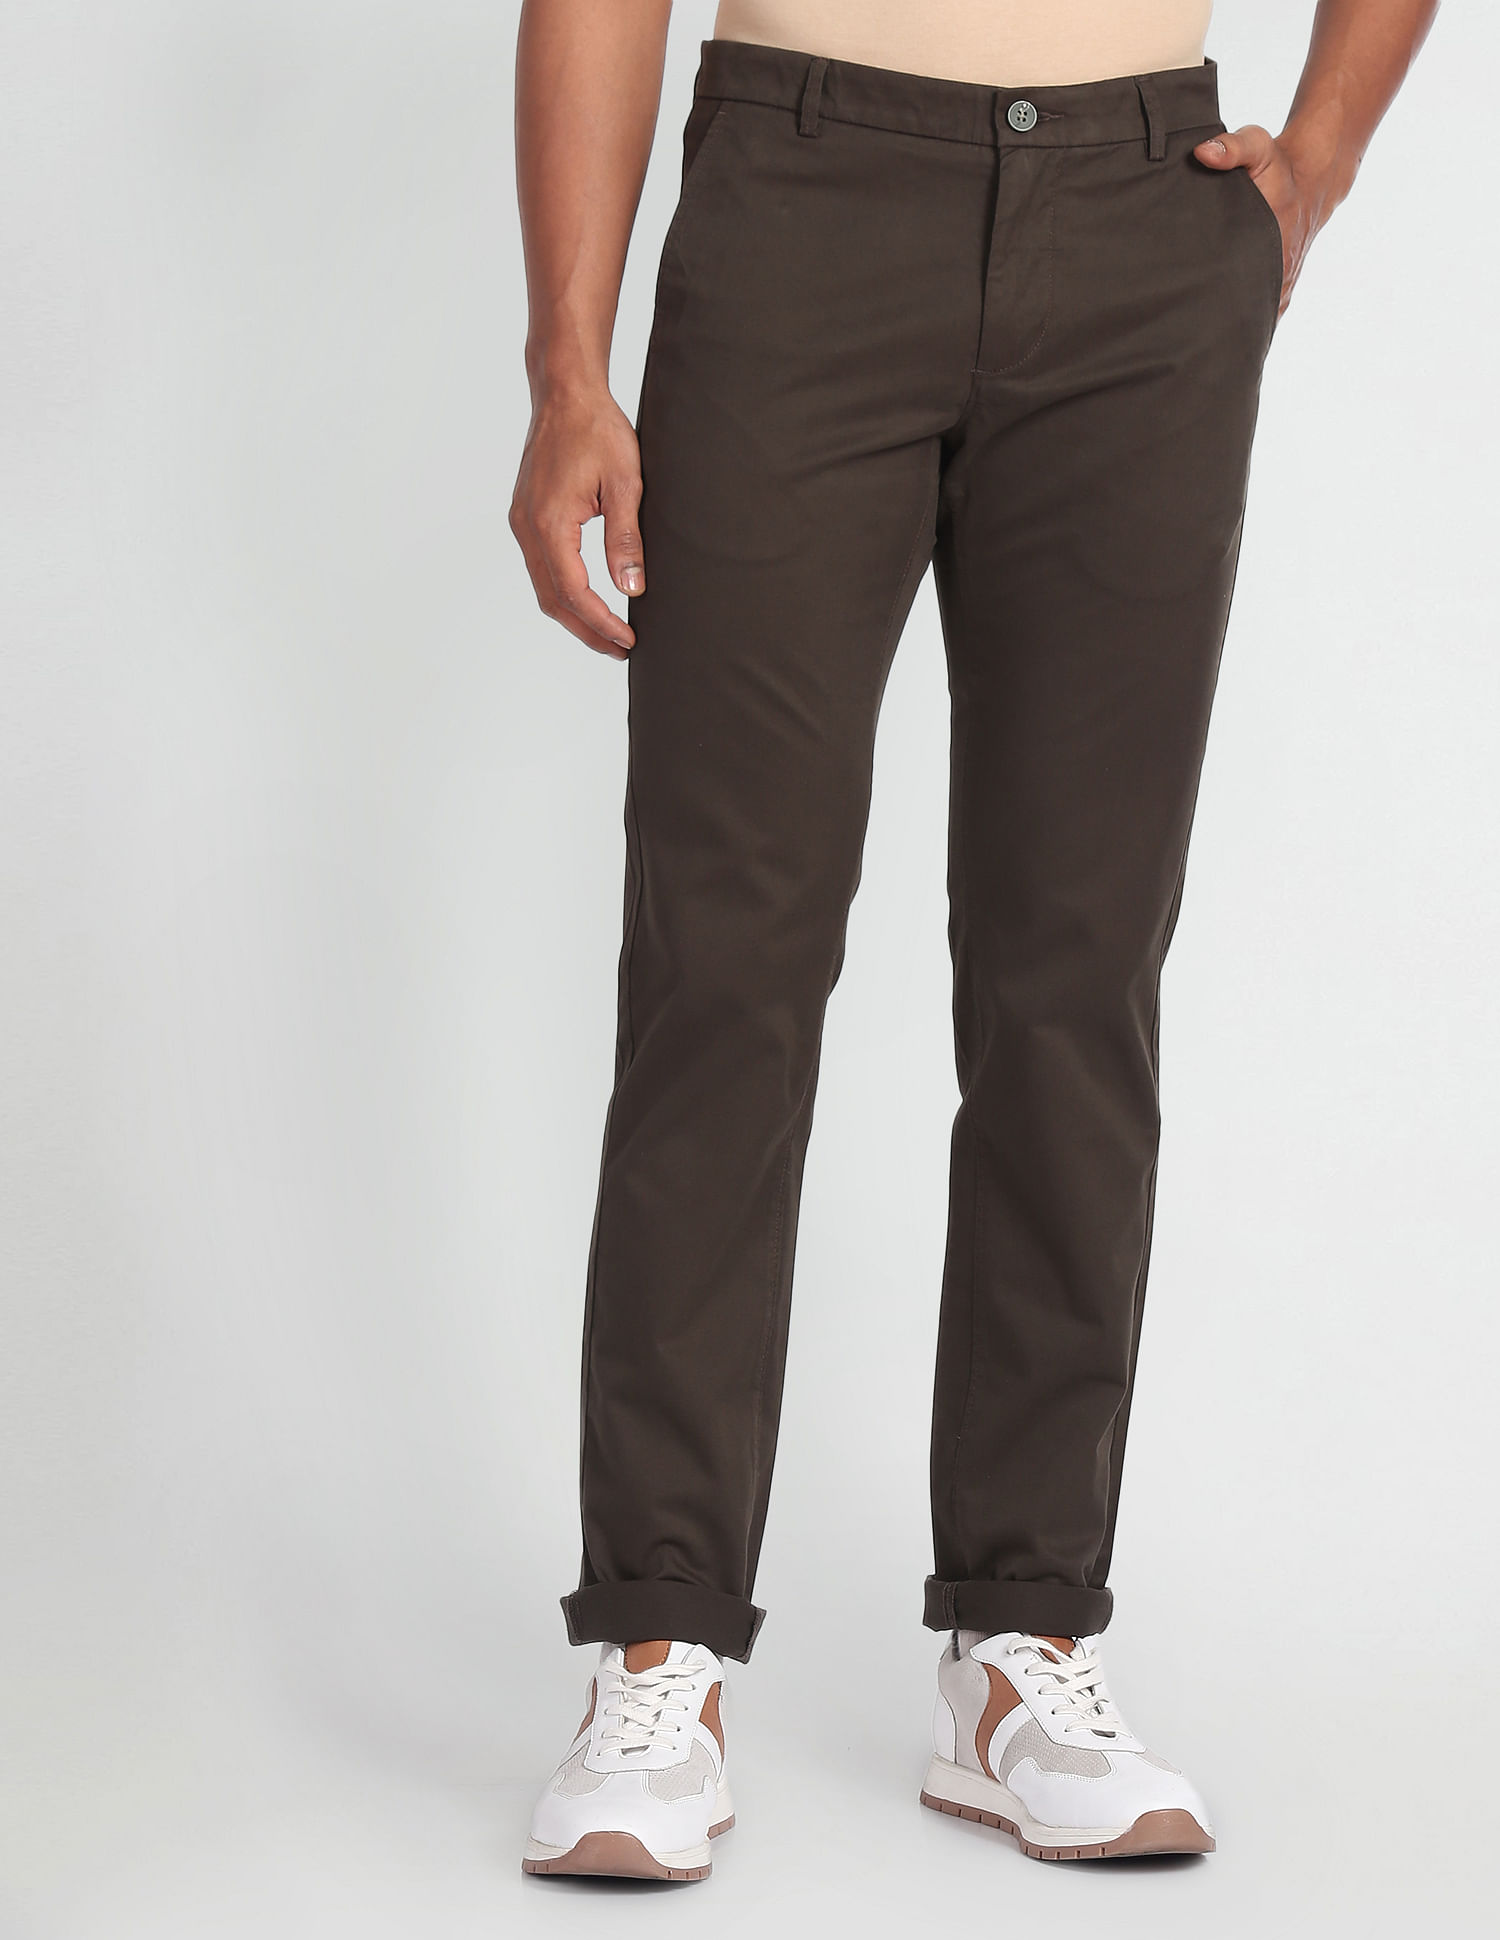 Buy Golf Trousers Online at Best Price in India